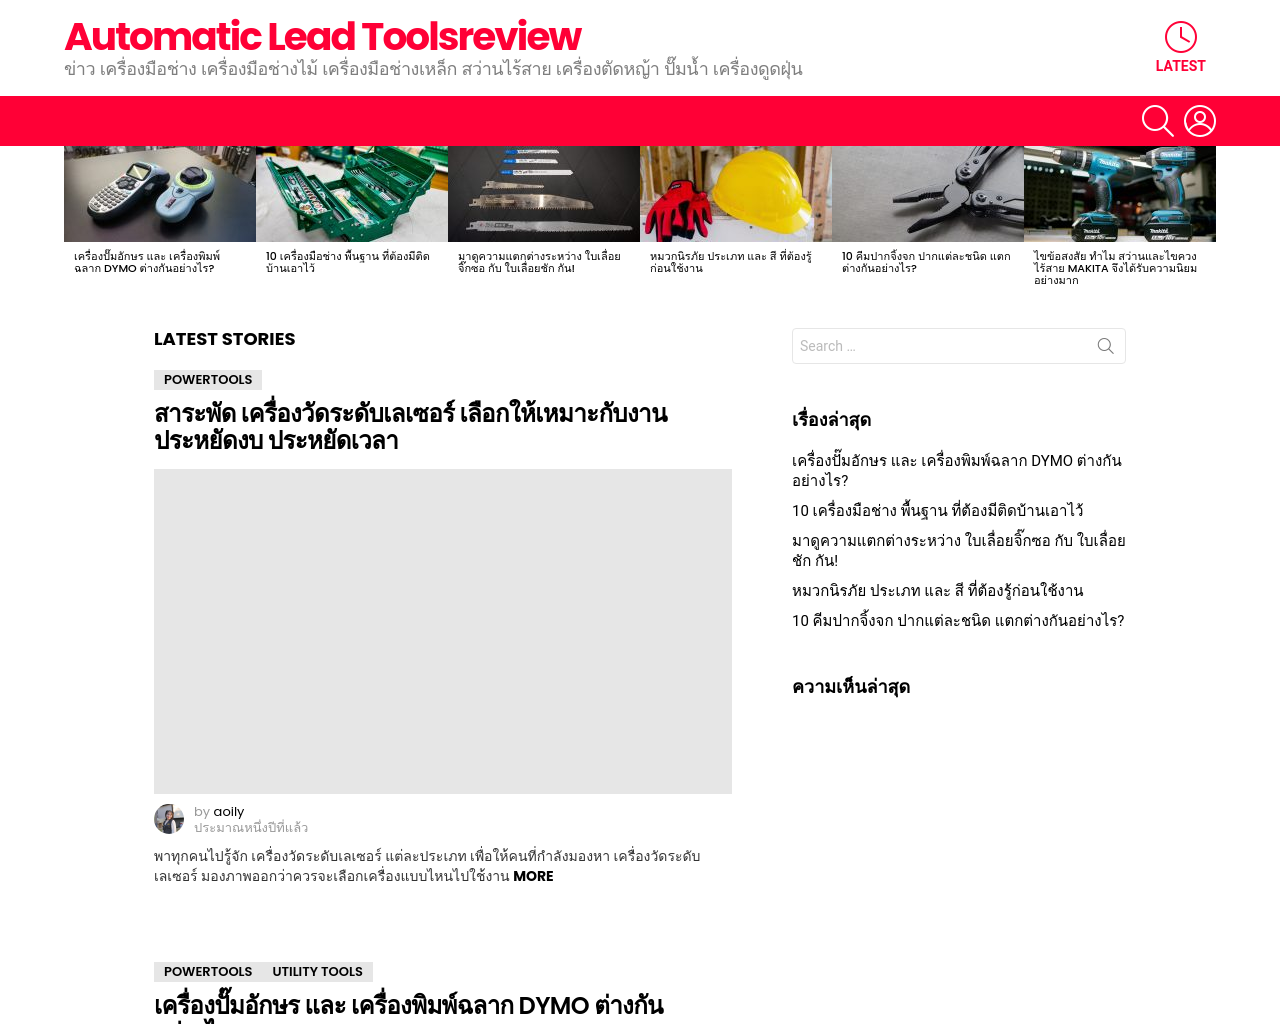 automaticleadtoolsreview.us